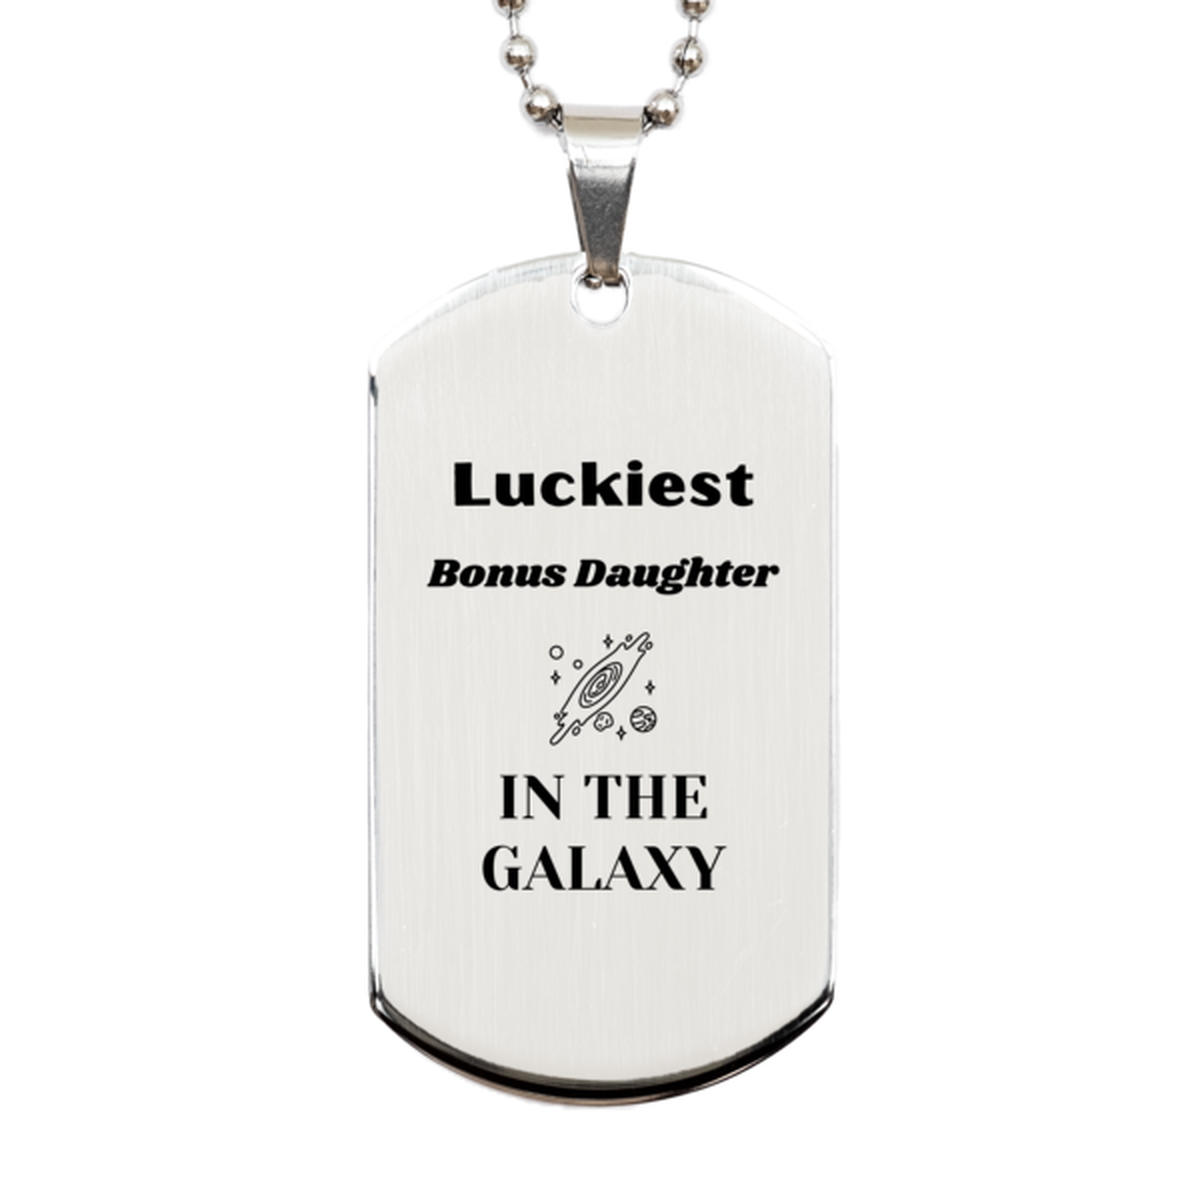 Luckiest Bonus Daughter in the Galaxy, To My Bonus Daughter Engraved Gifts, Christmas Bonus Daughter Silver Dog Tag Gifts, X-mas Birthday Unique Gifts For Bonus Daughter Men Women